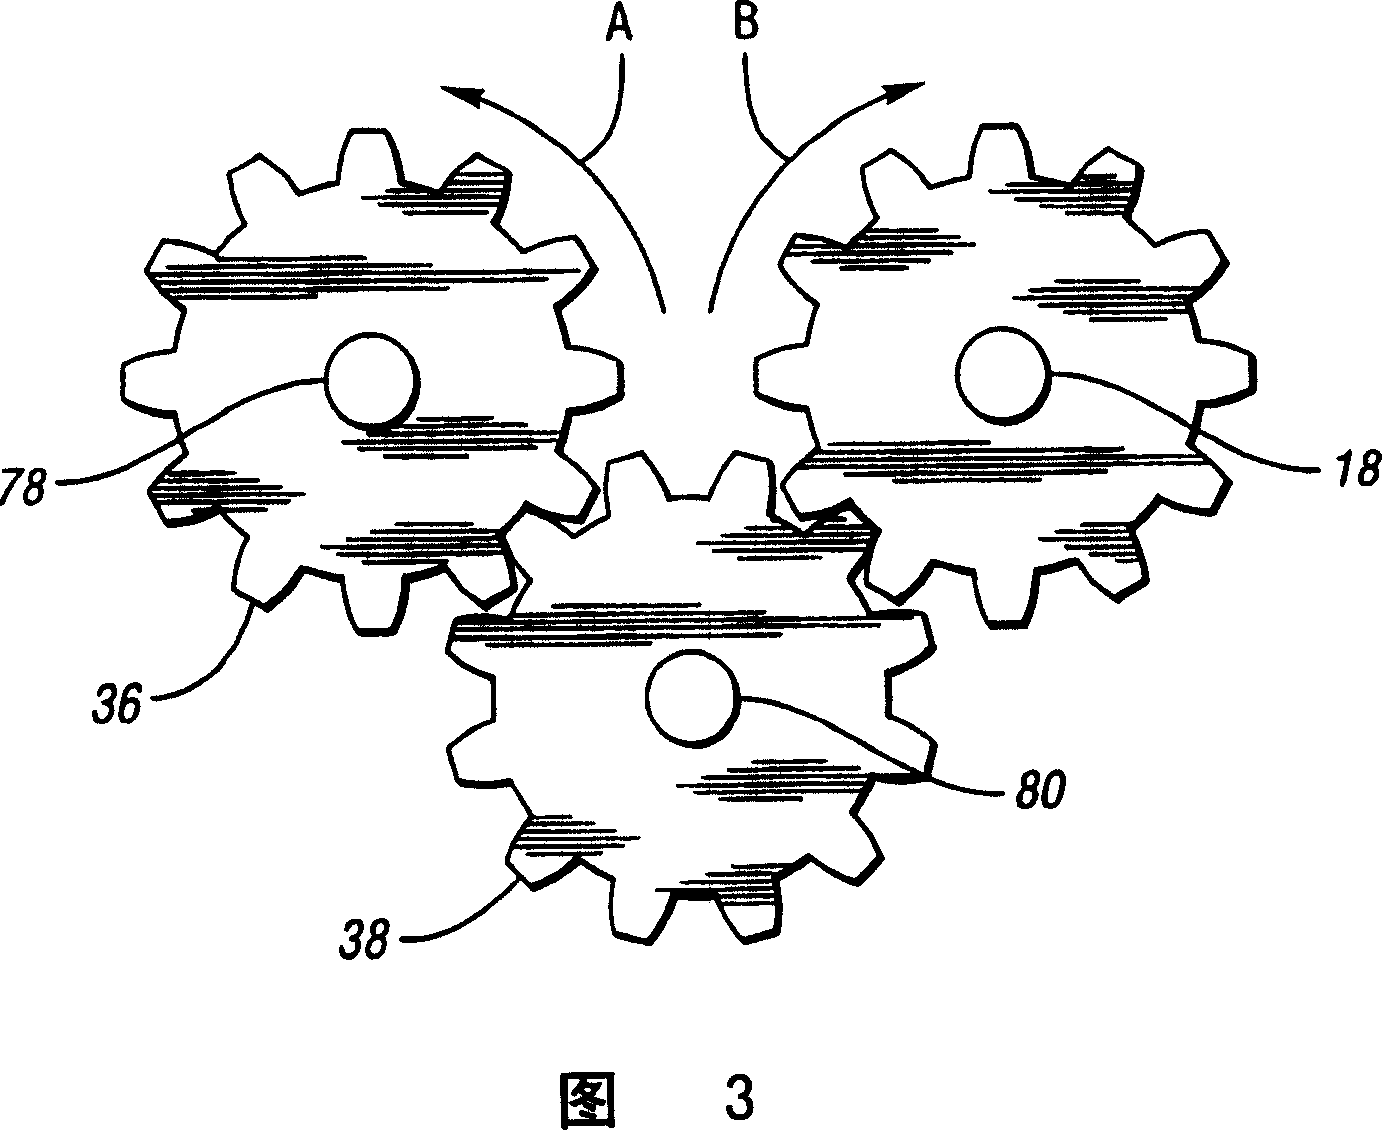 Hydraulic active damping system for gears and method